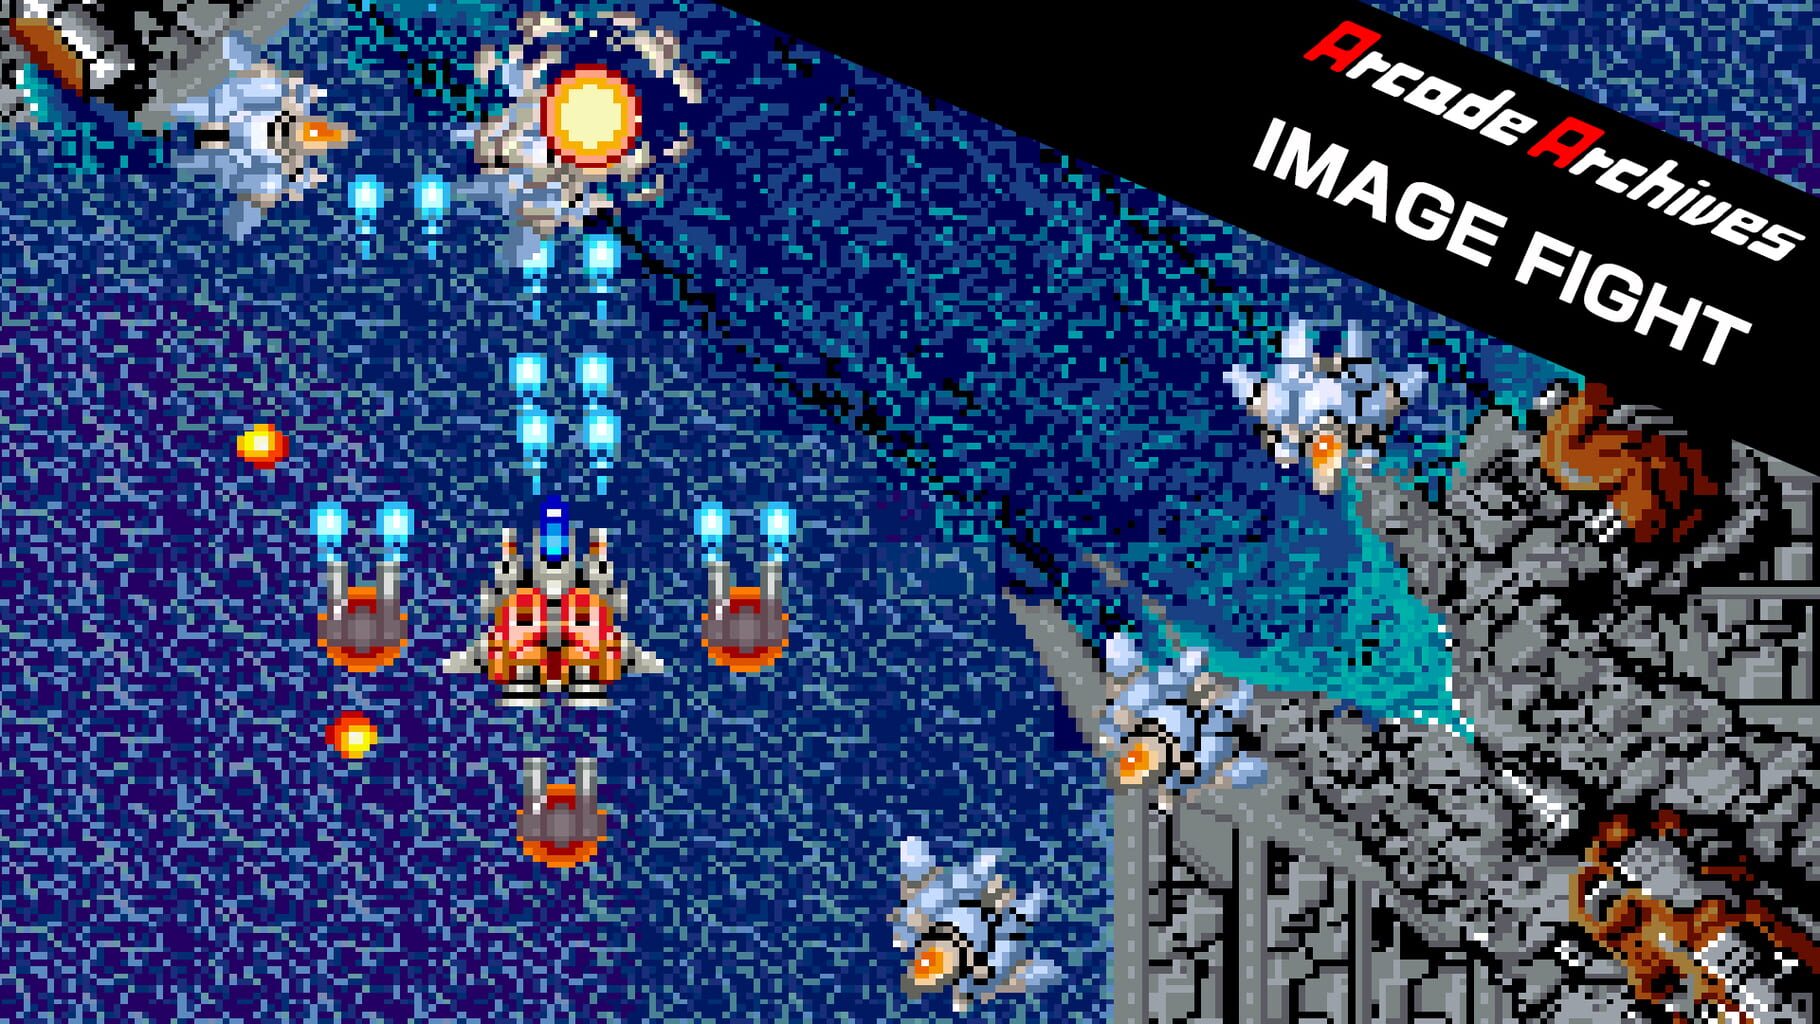 Arcade Archives: Image Fight artwork